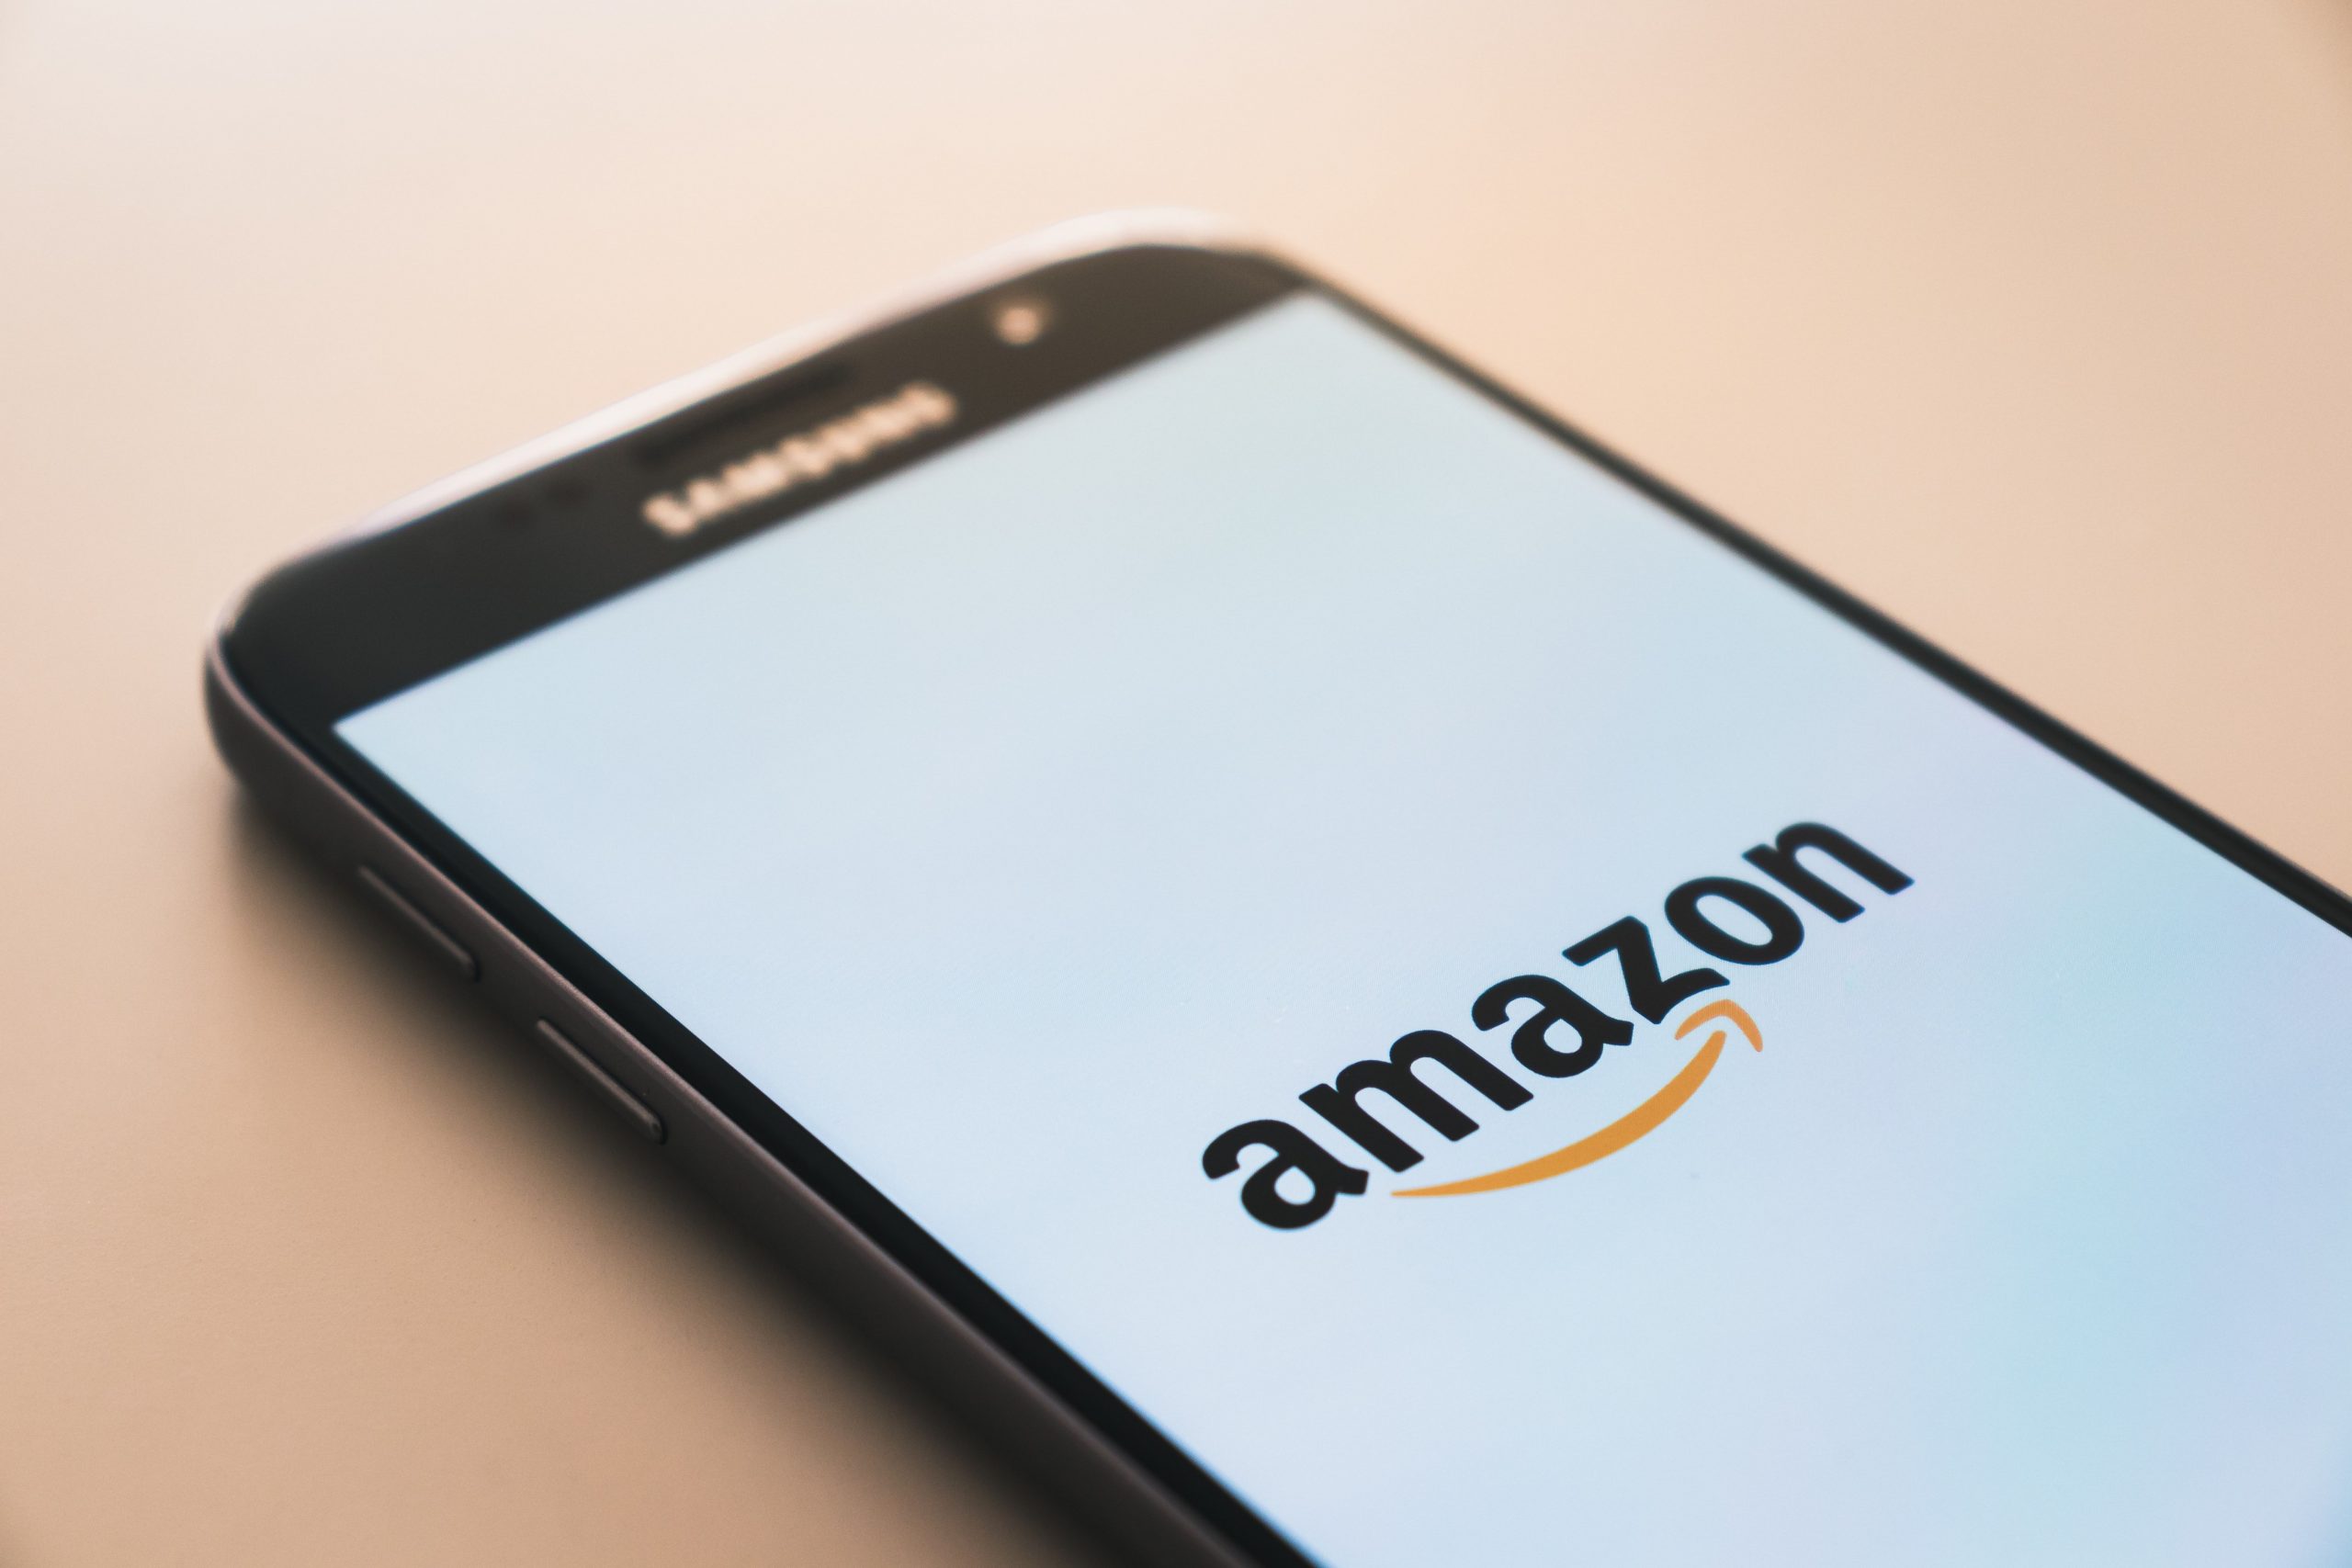 Amazon outage: What caused it and will there be more